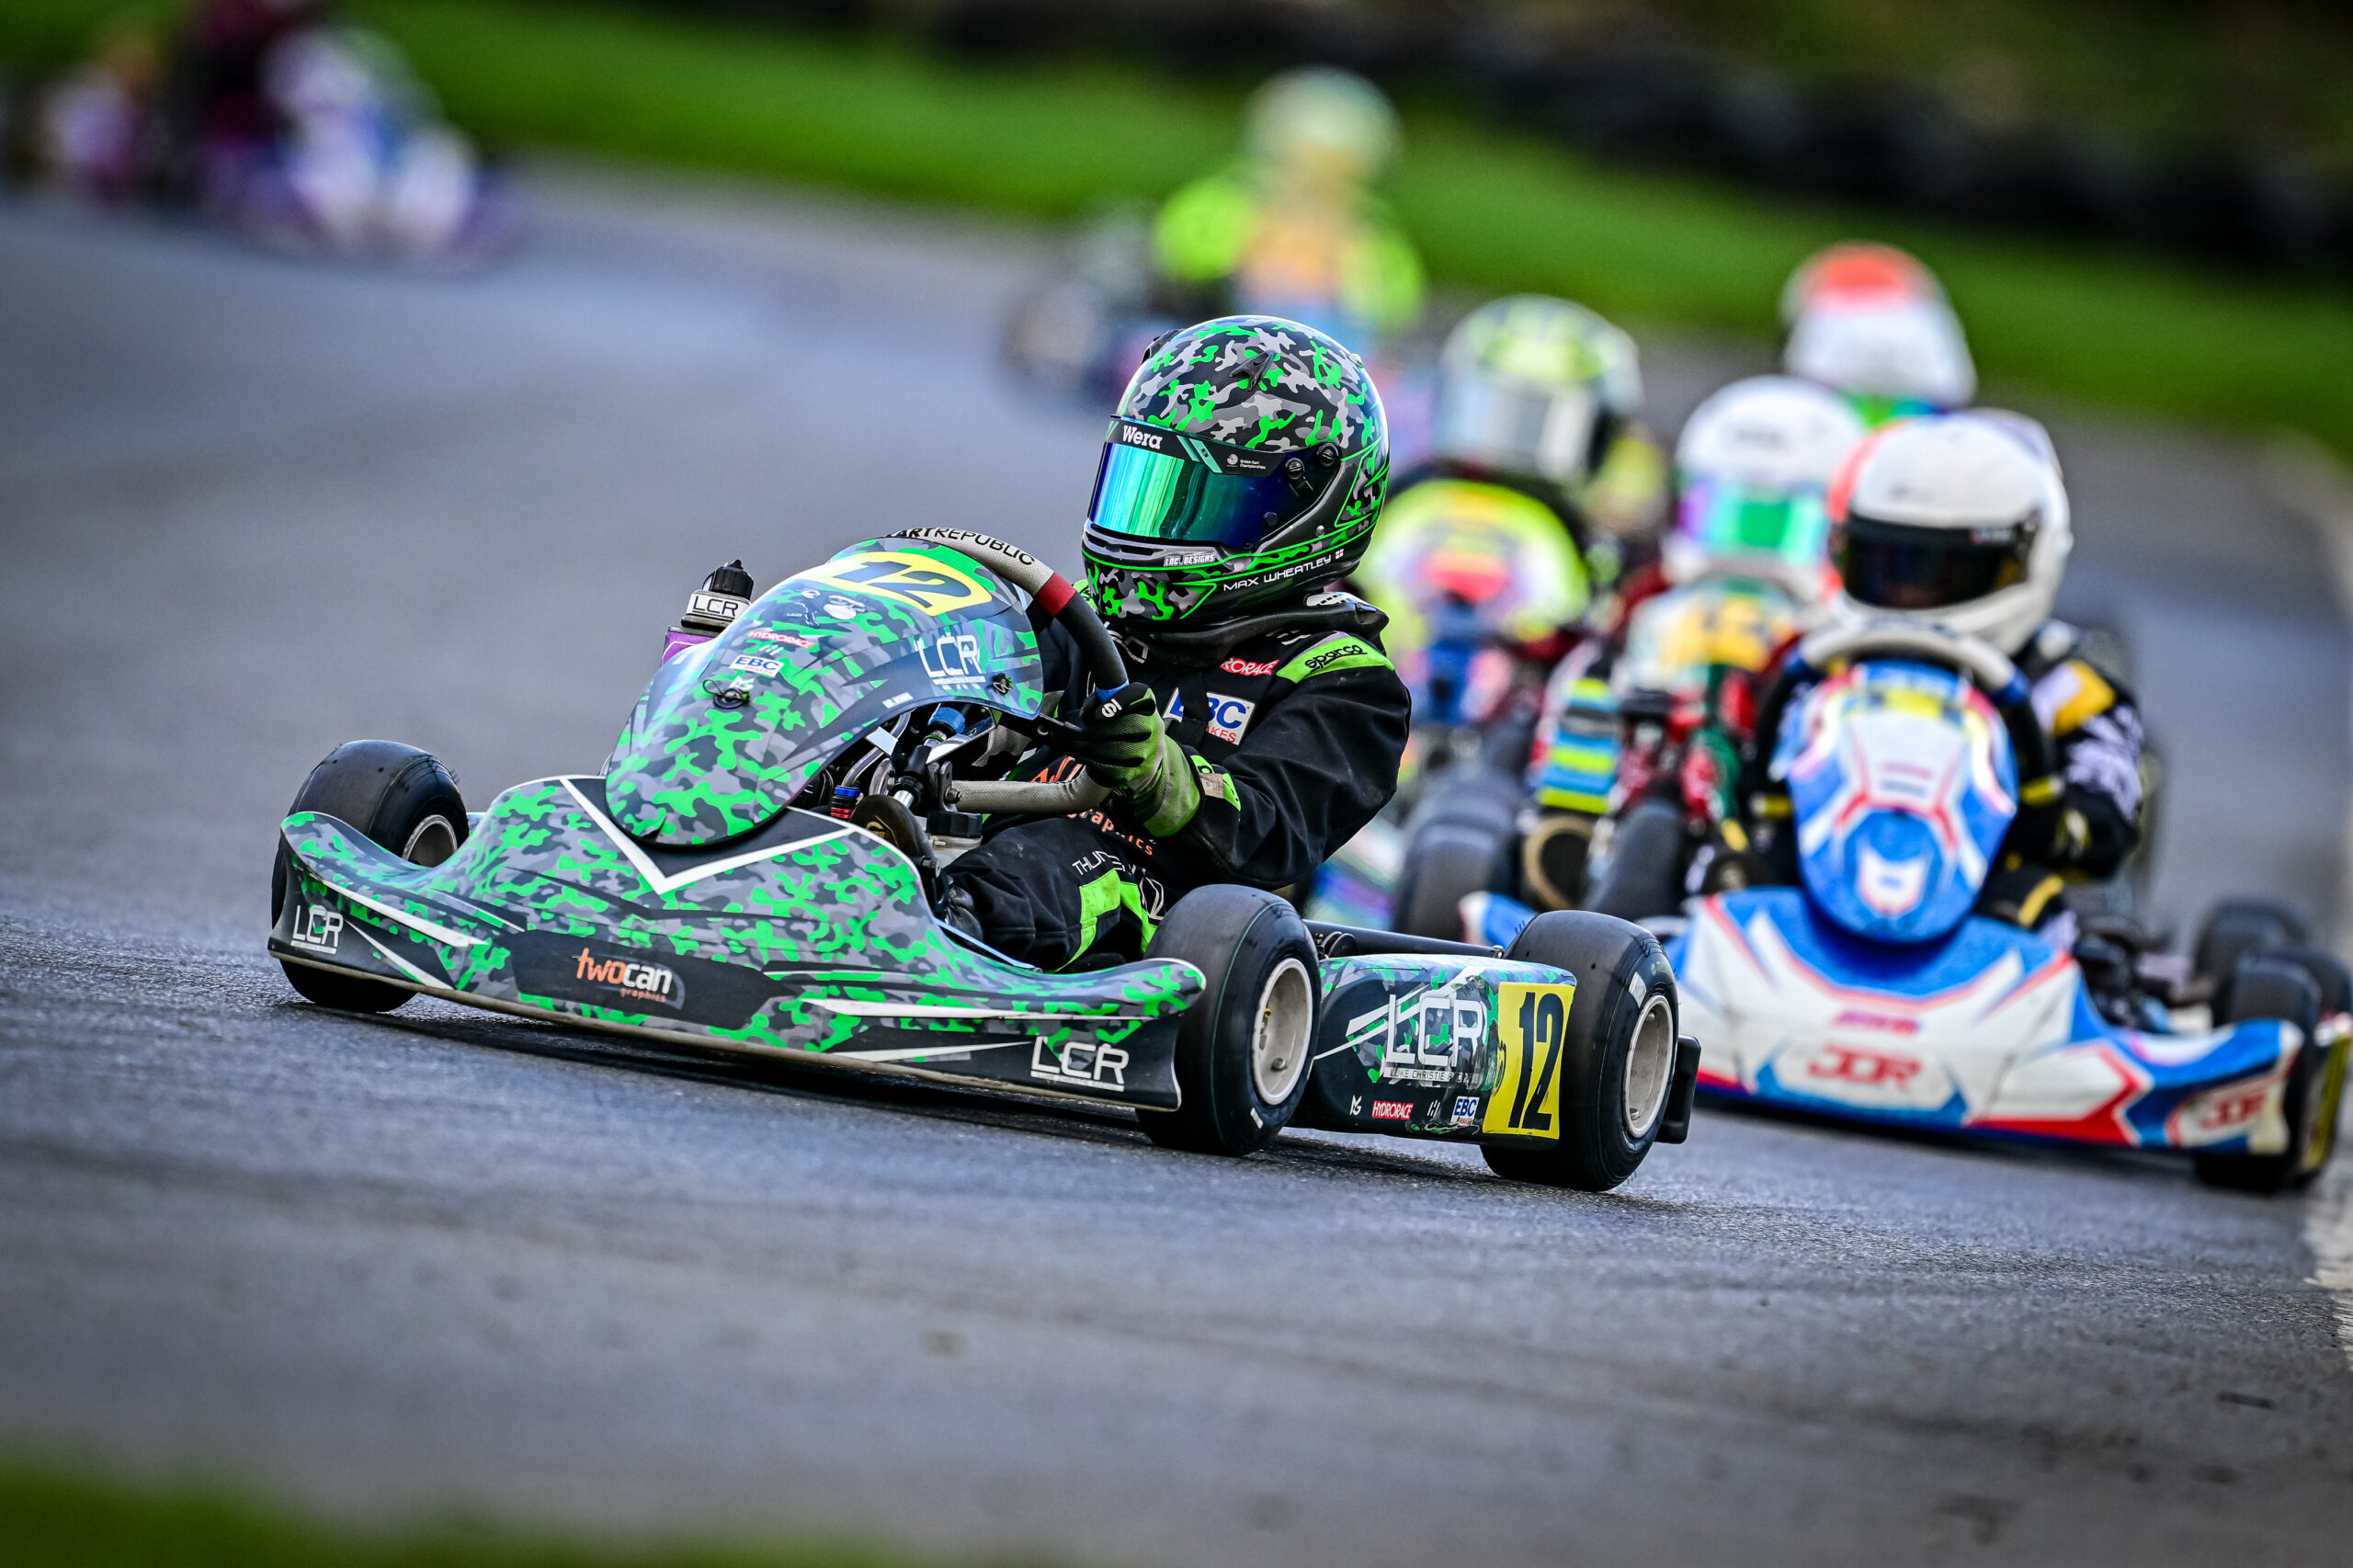 EBC-Equipped Kart Racer Wheatley in Gruelling Three-Day Whilton Mill ‘Long Weekender’